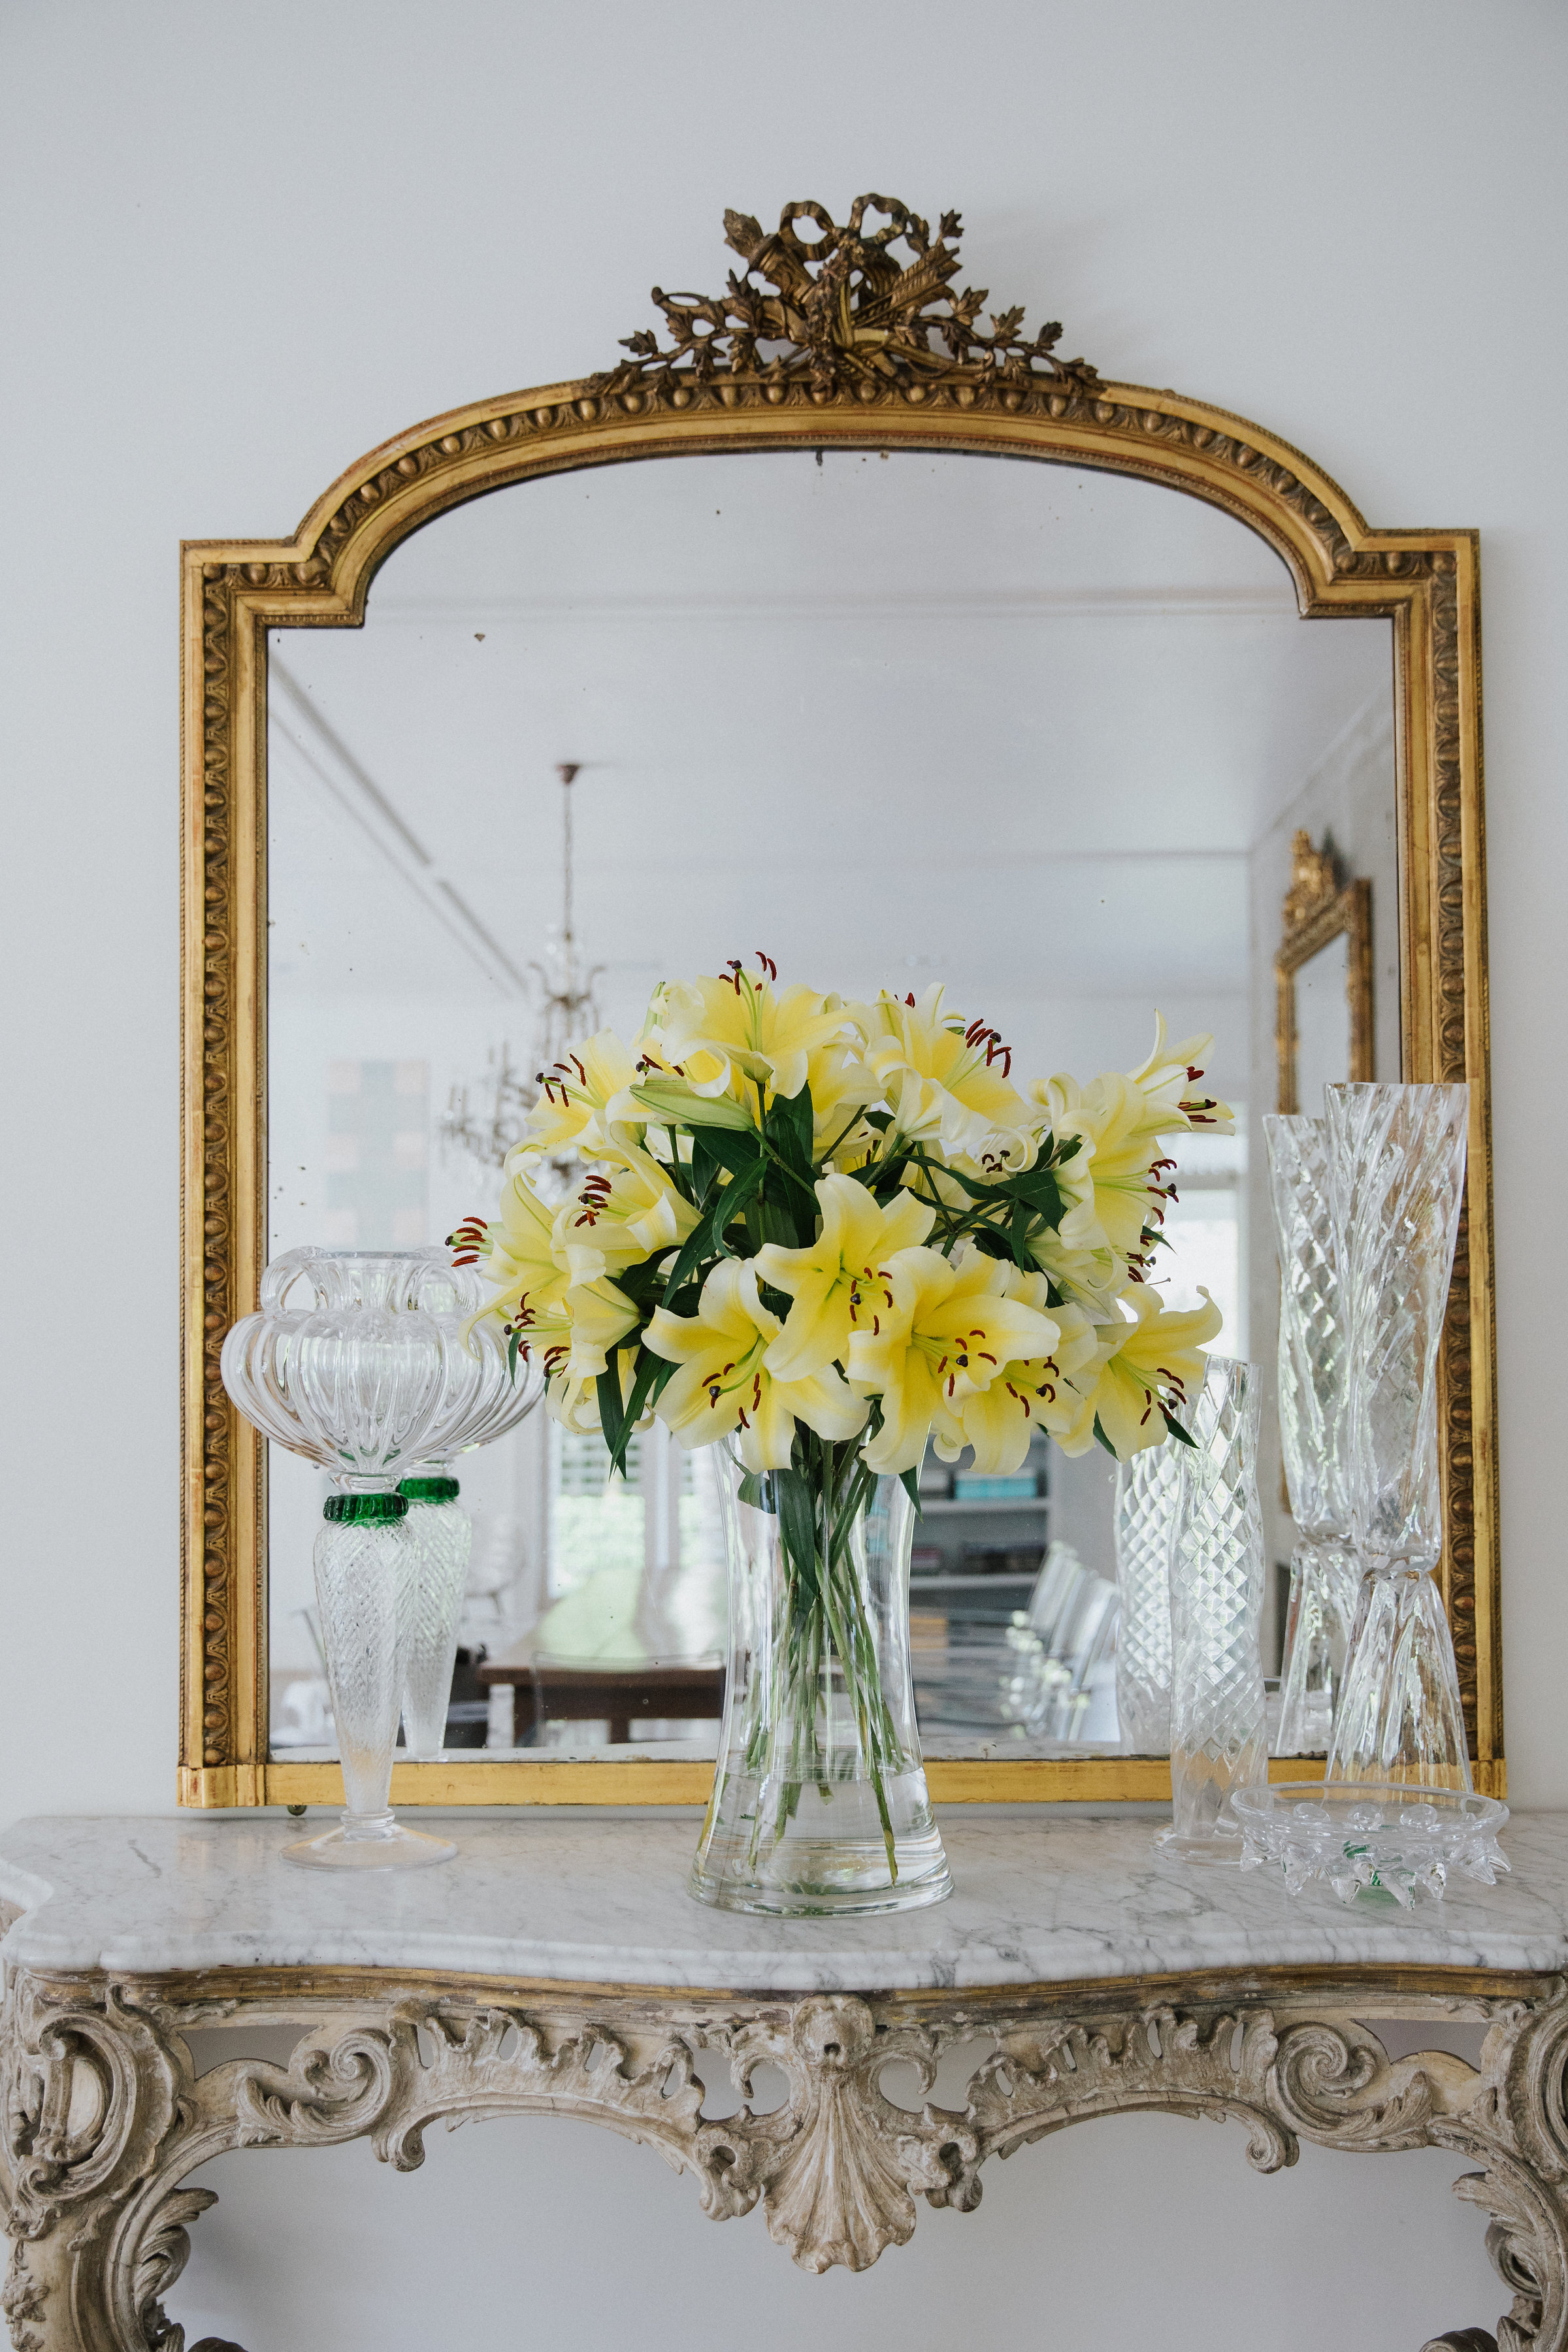 Mirror and yellow flowers